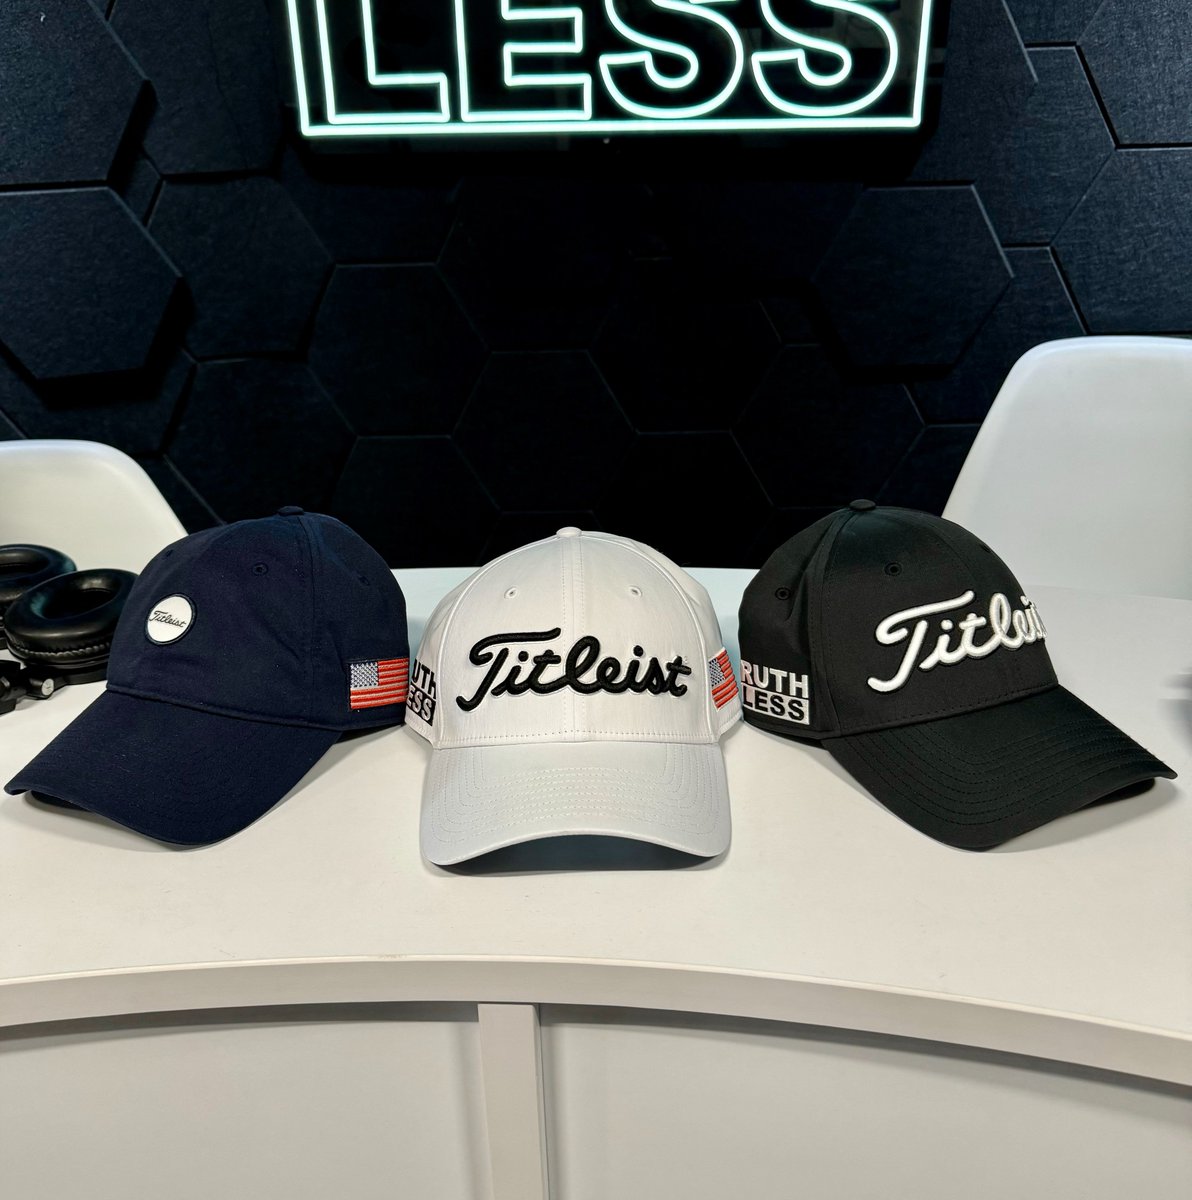 🚨 Ruthless Titleist hats are back🚨 This is a limited edition offering with less than 90 left in stock. Get yours while supplies last: store.ruthlesspodcast.com